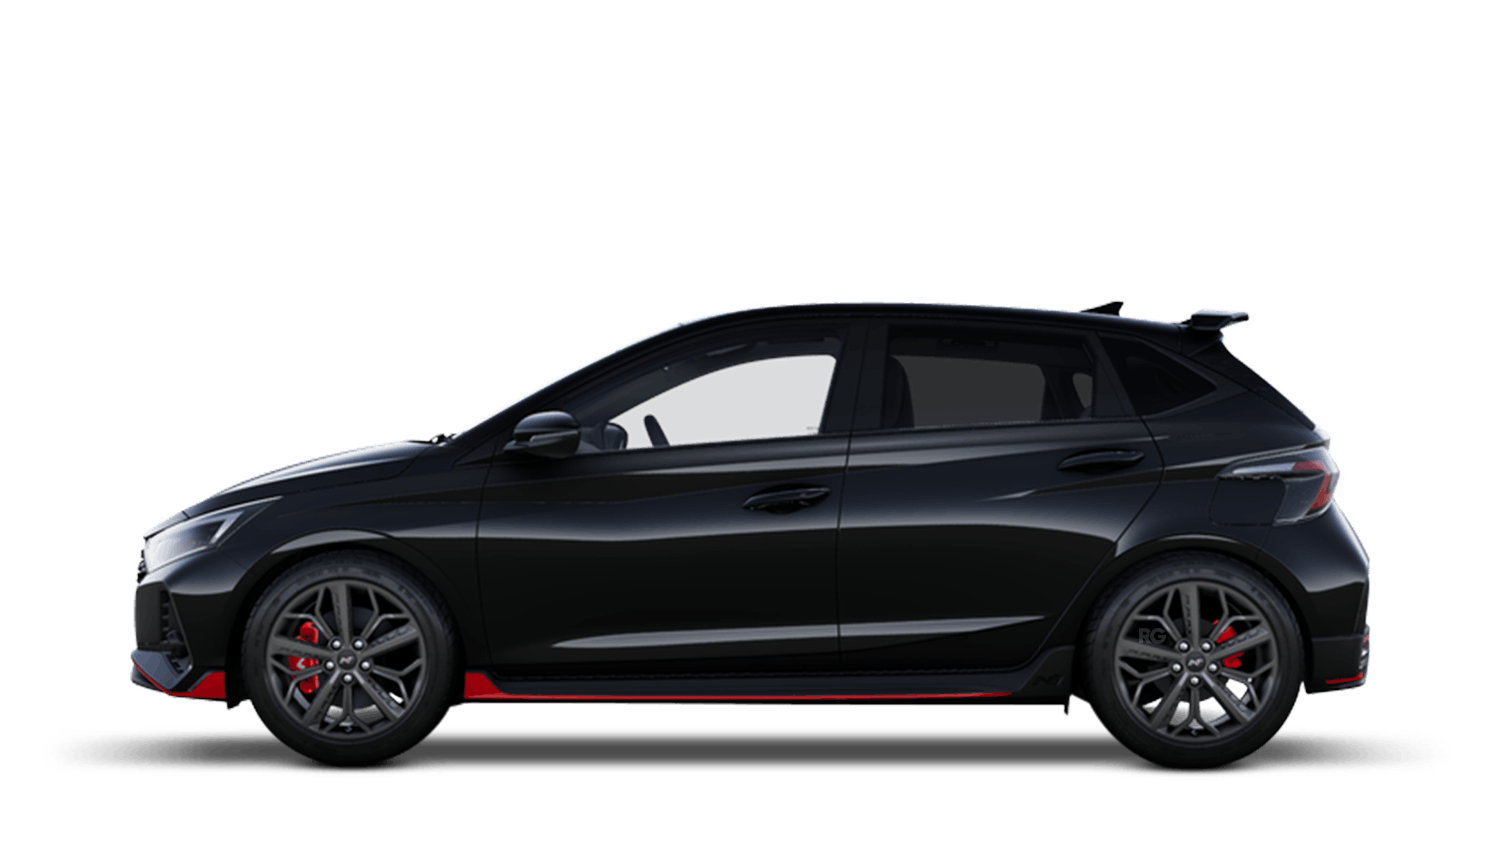 Hyundai i20 N. Sports car suitable for everyday use